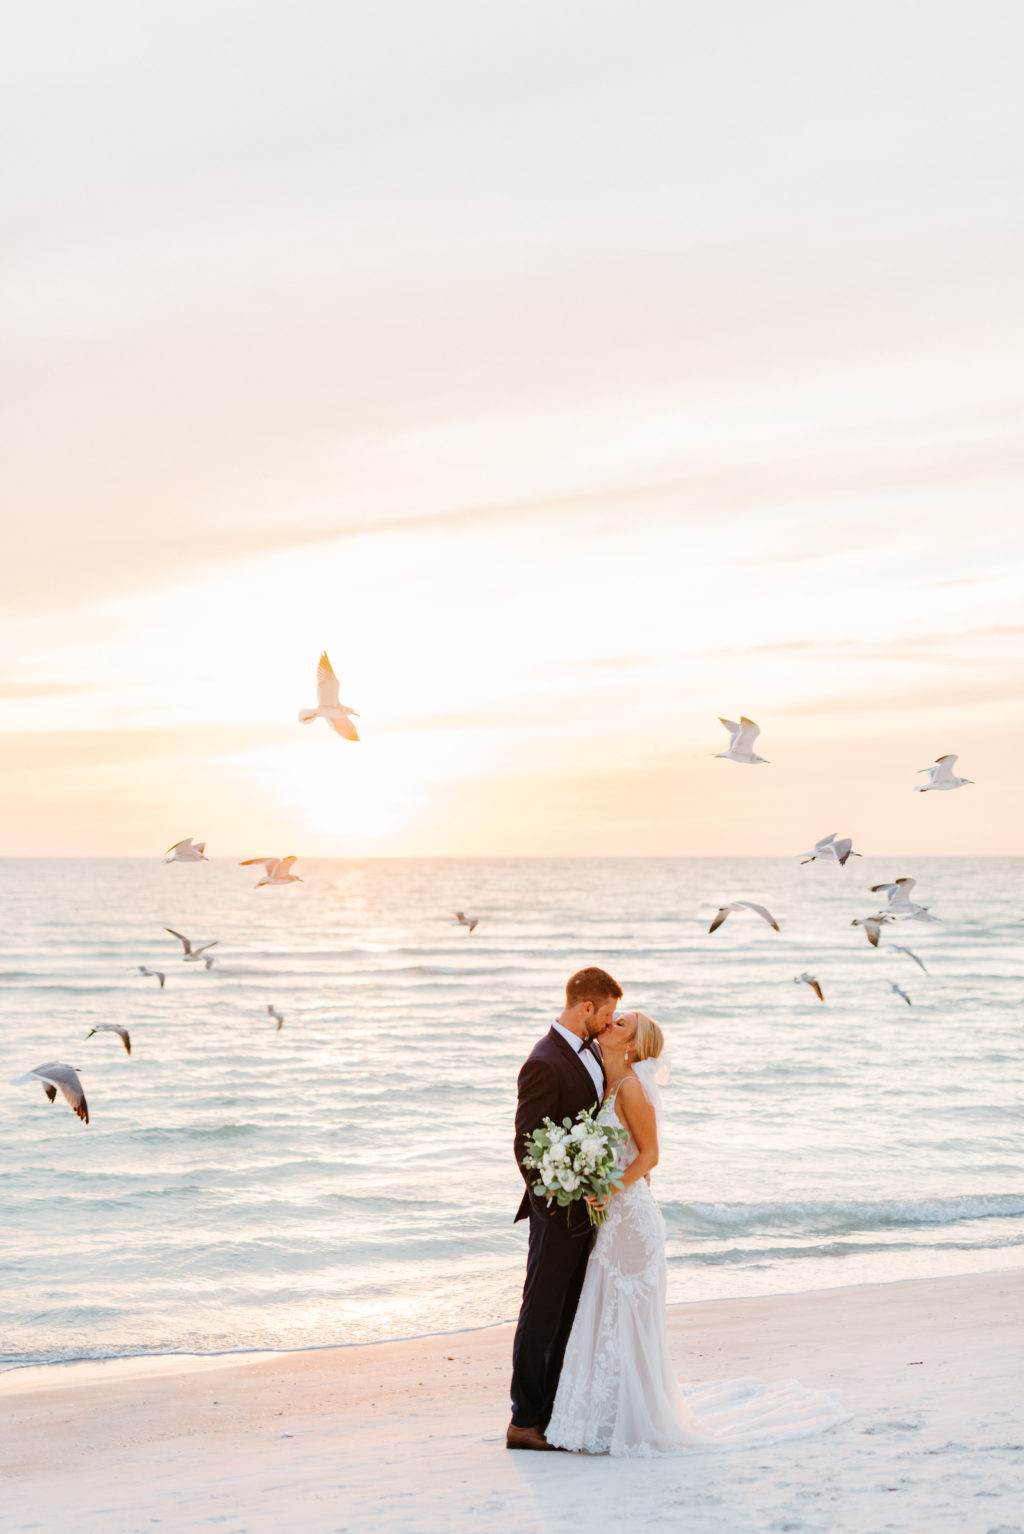 Romantic Bride and Groom Kissing on Florida Beach During Sunset with Seagull Birds Flying | Sarasota Wedding Venue The Resort at Longboat Key Club